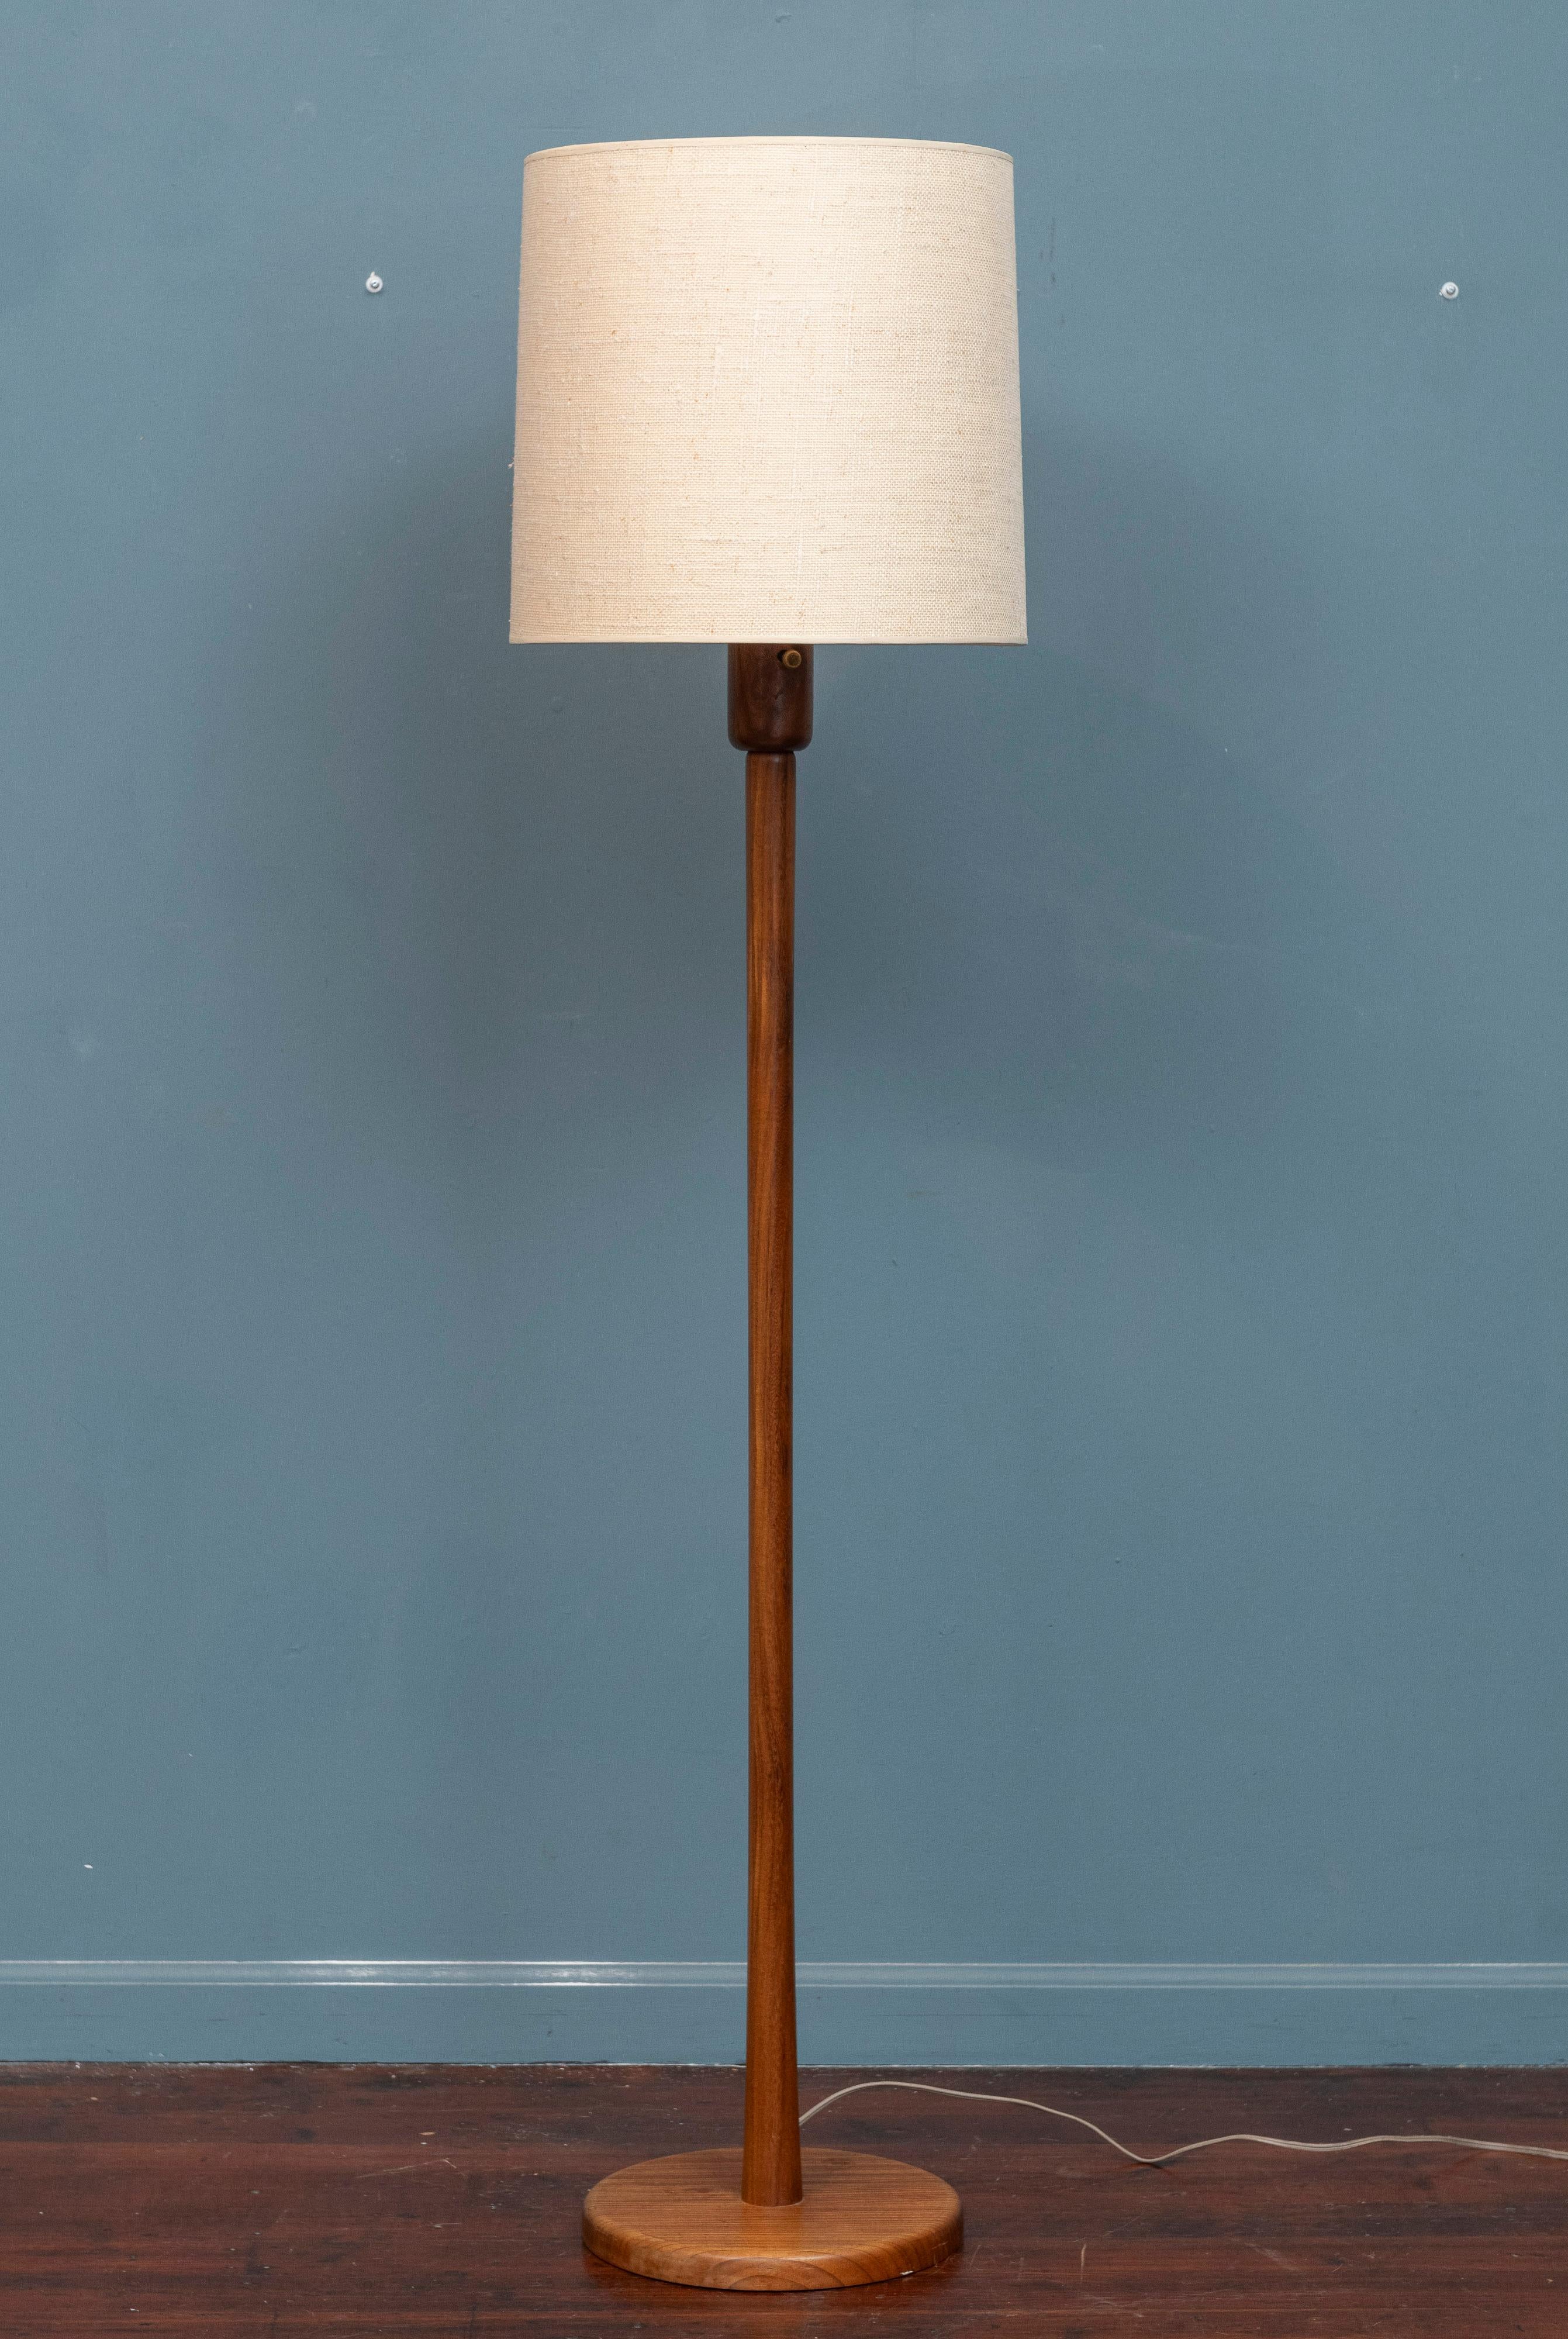 Gordon & Jane Martz design floor lamp. High quality construction and use of materials by the husband and wife design couple. Beautiful sculpted walnut body with tapering in diameter throughout and a weighted base for stability. Super simple but